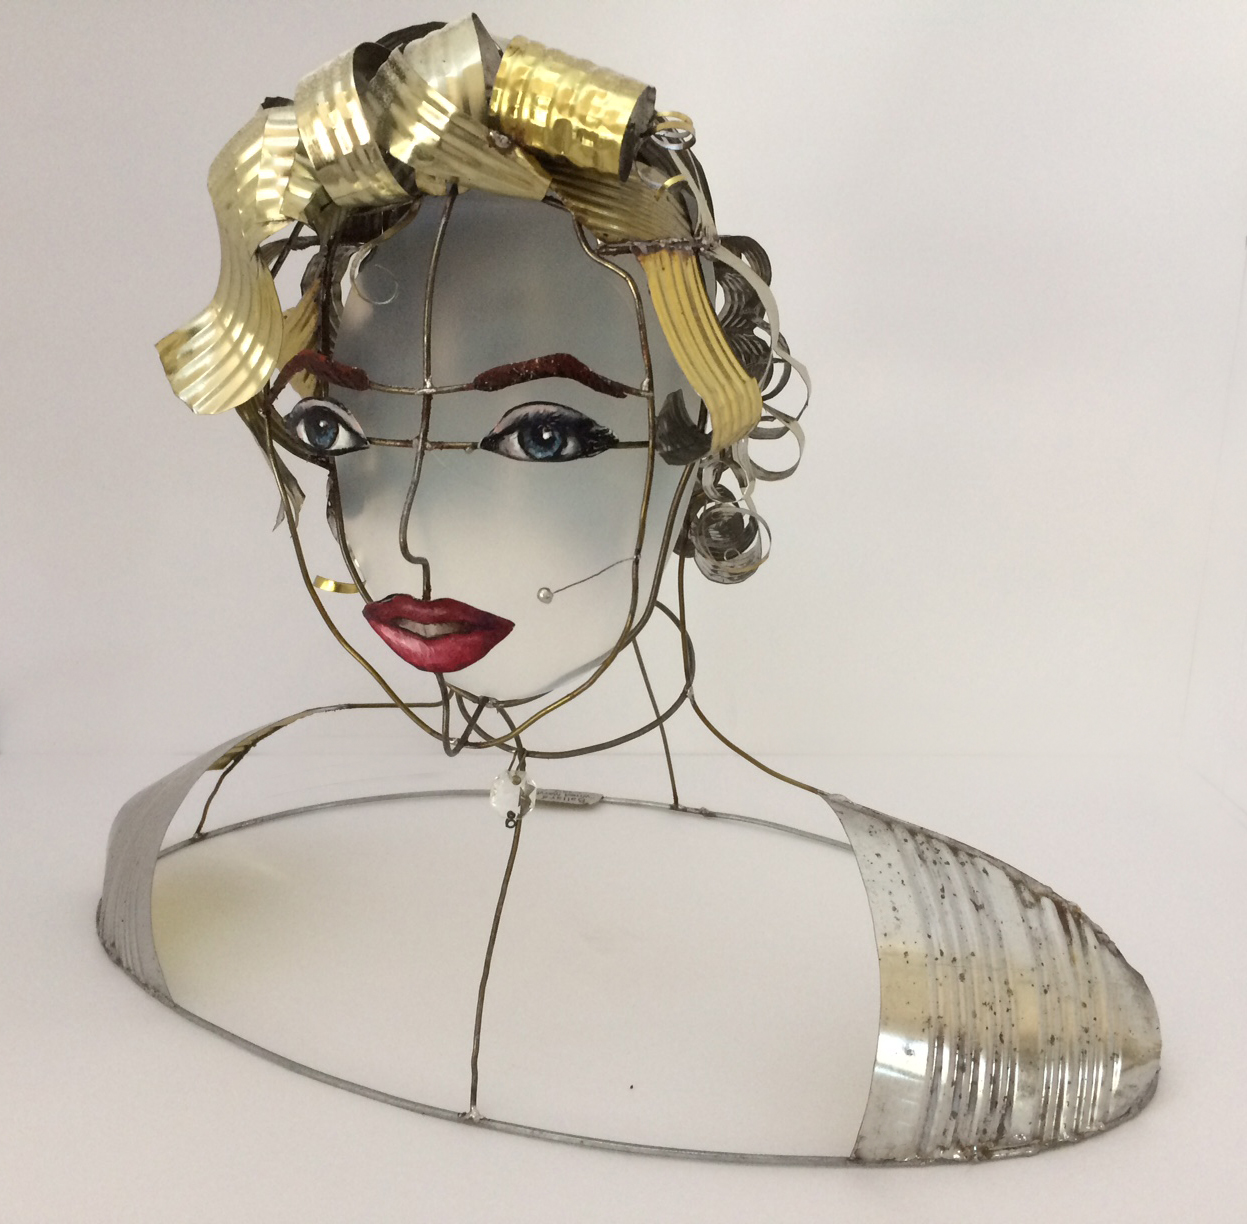   Wired Marilyn   Wire/Tin Sculpture.   16" x 14" x 10" 